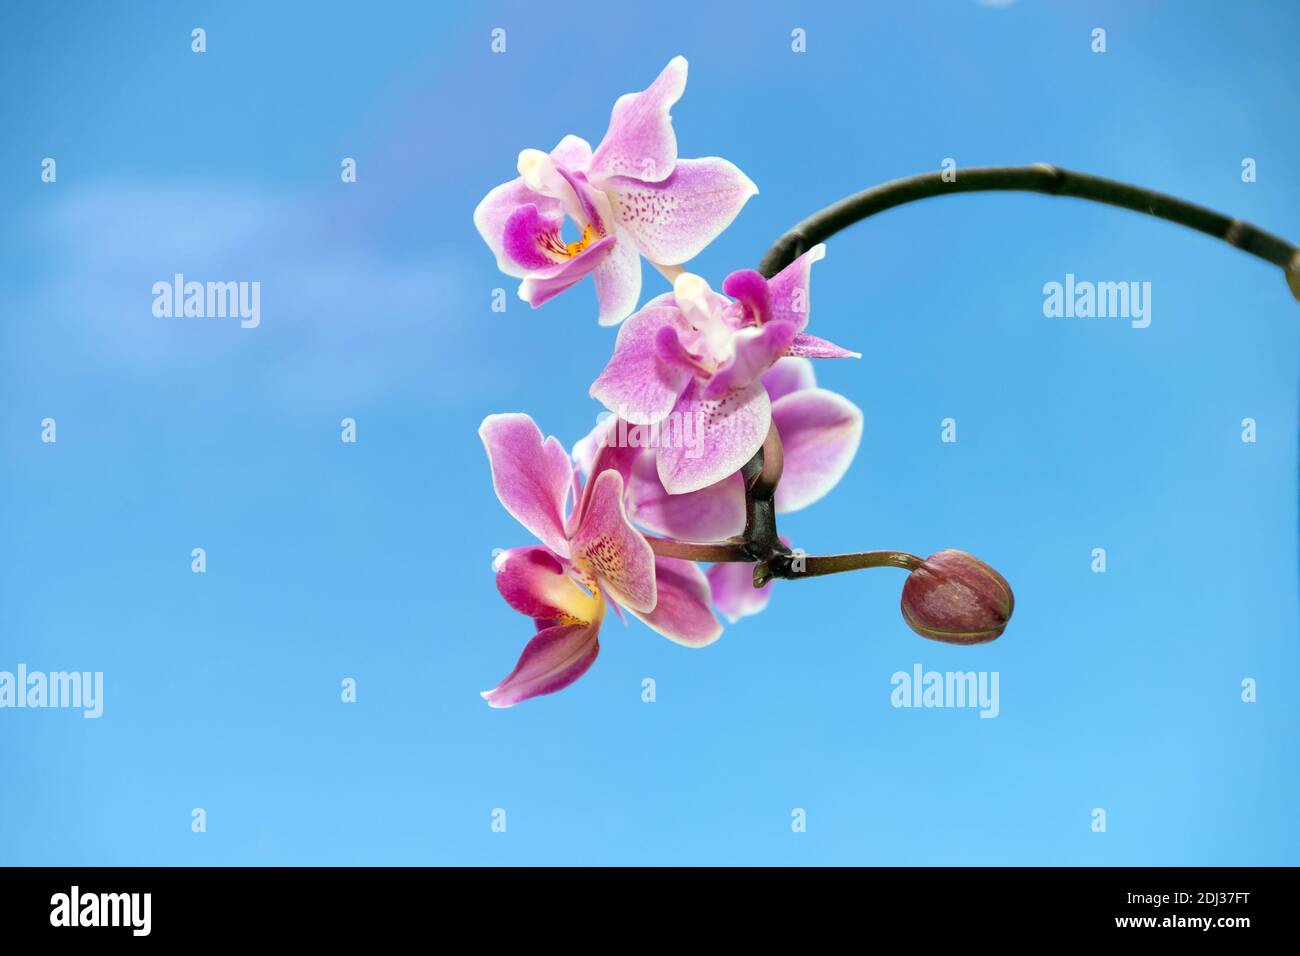 A branch with flowers of a miniature Phalaenopsis Vienna orchid against a blue sky. Stock Photo